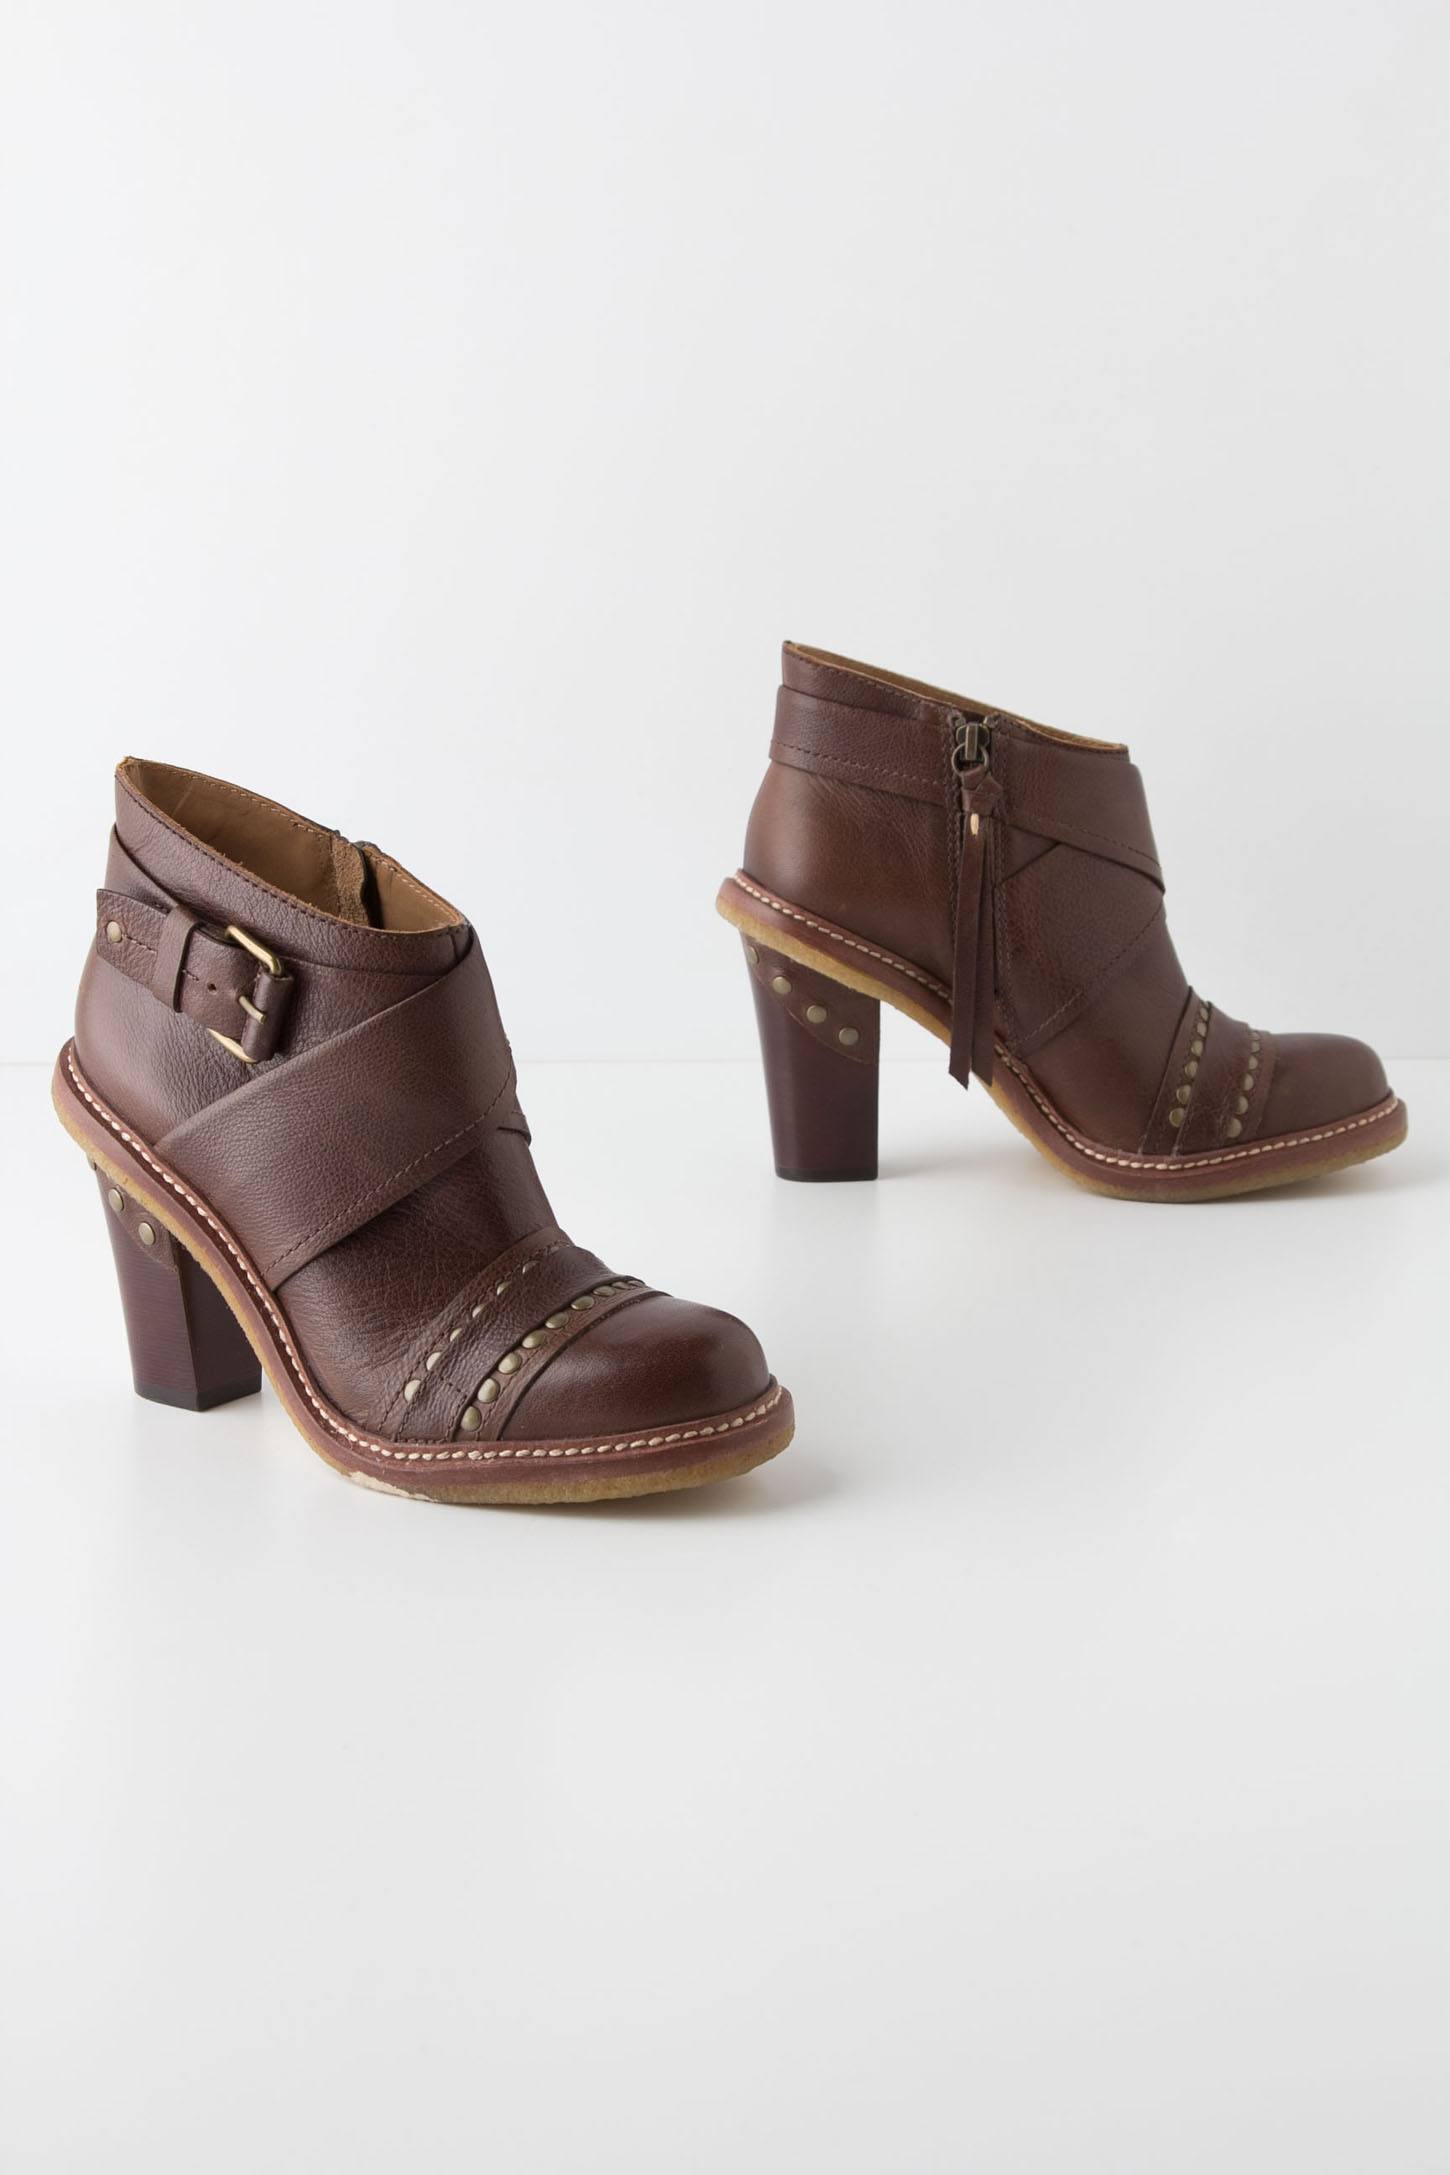 Effortlessly with roxy: Reviews: Cherrywood Studded Boots, Studded ...